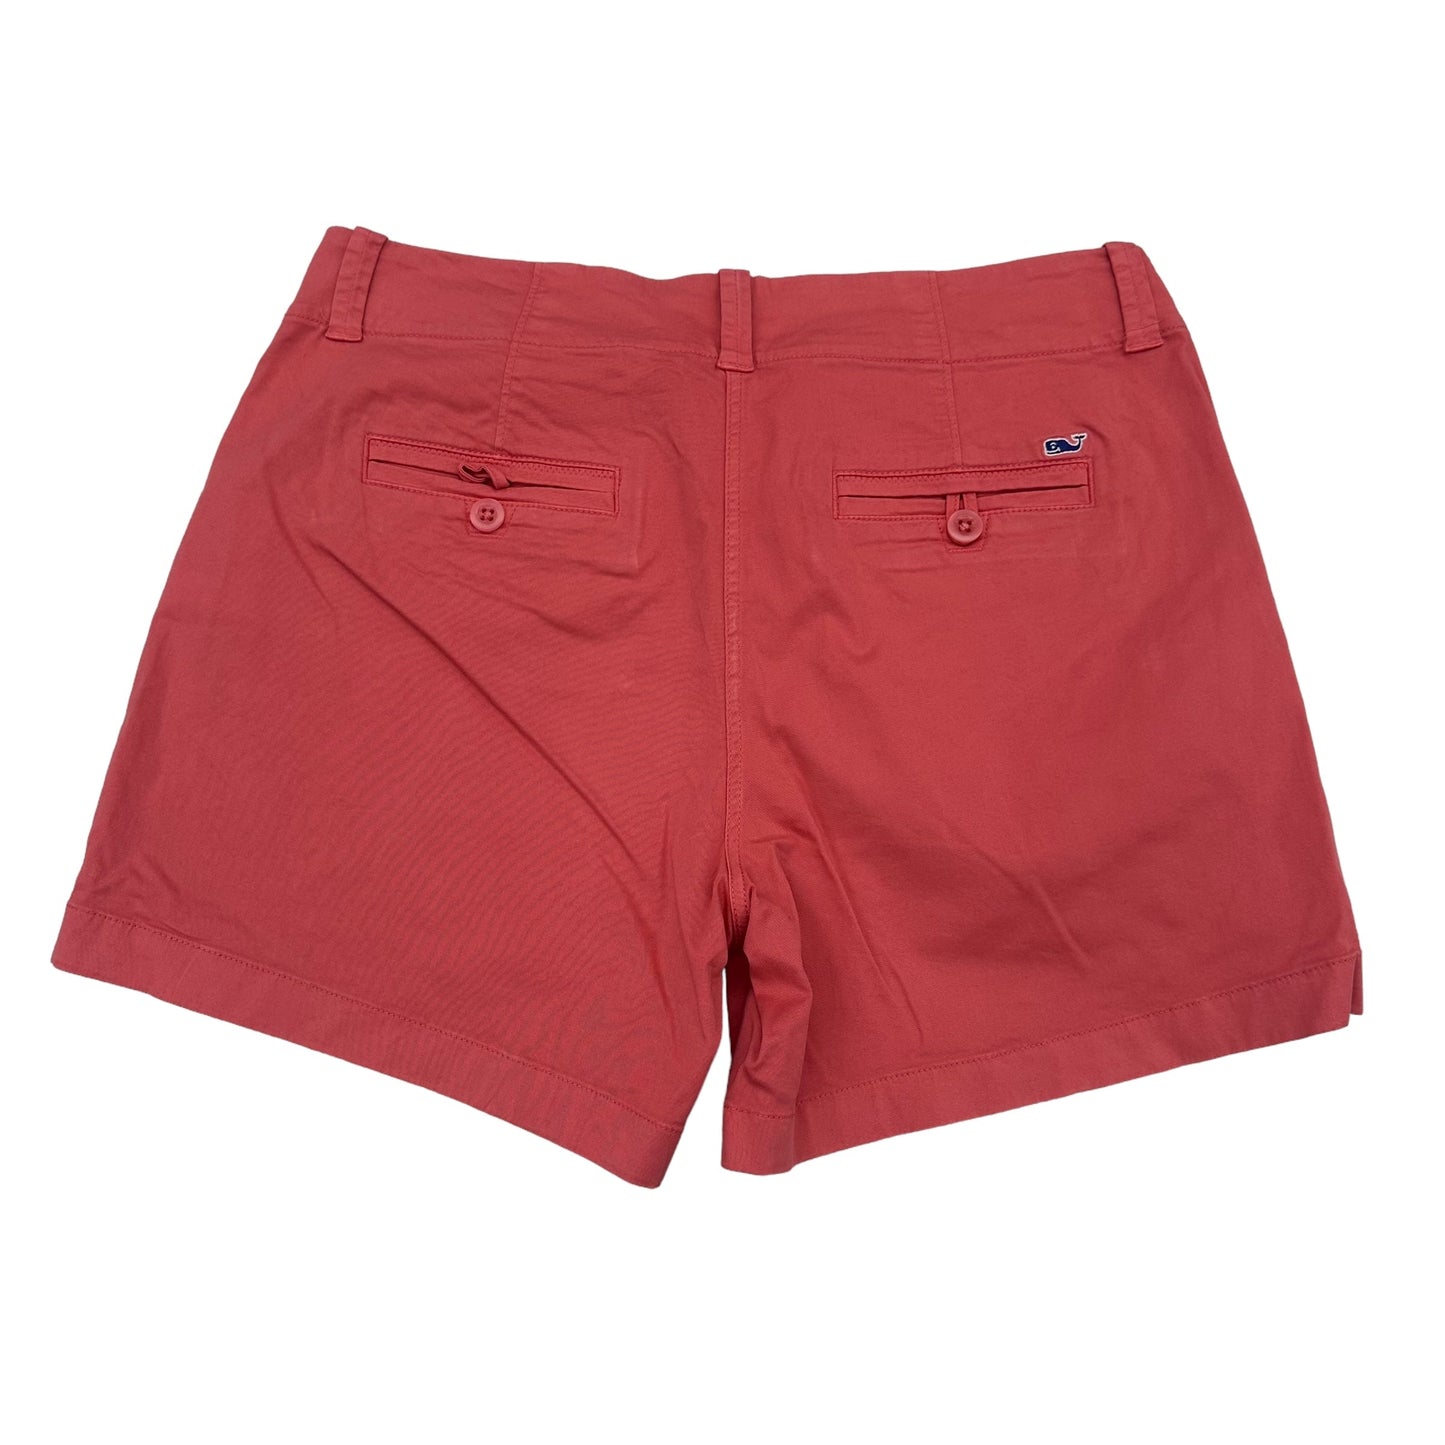 PINK SHORTS by VINEYARD VINES Size:8